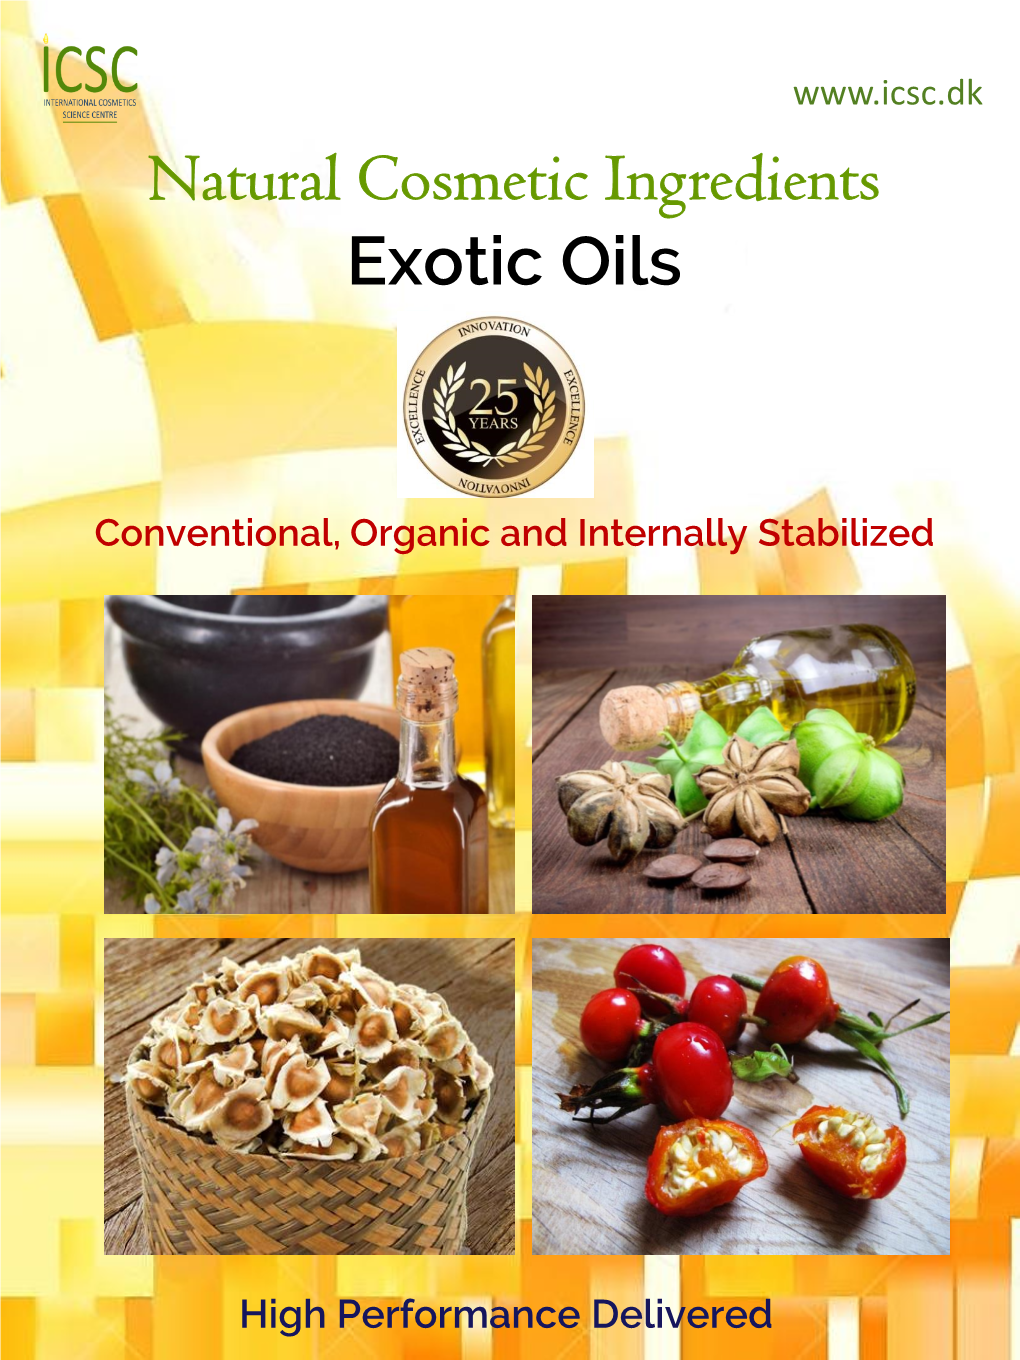 Natural Cosmetic Ingredients Exotic Oils